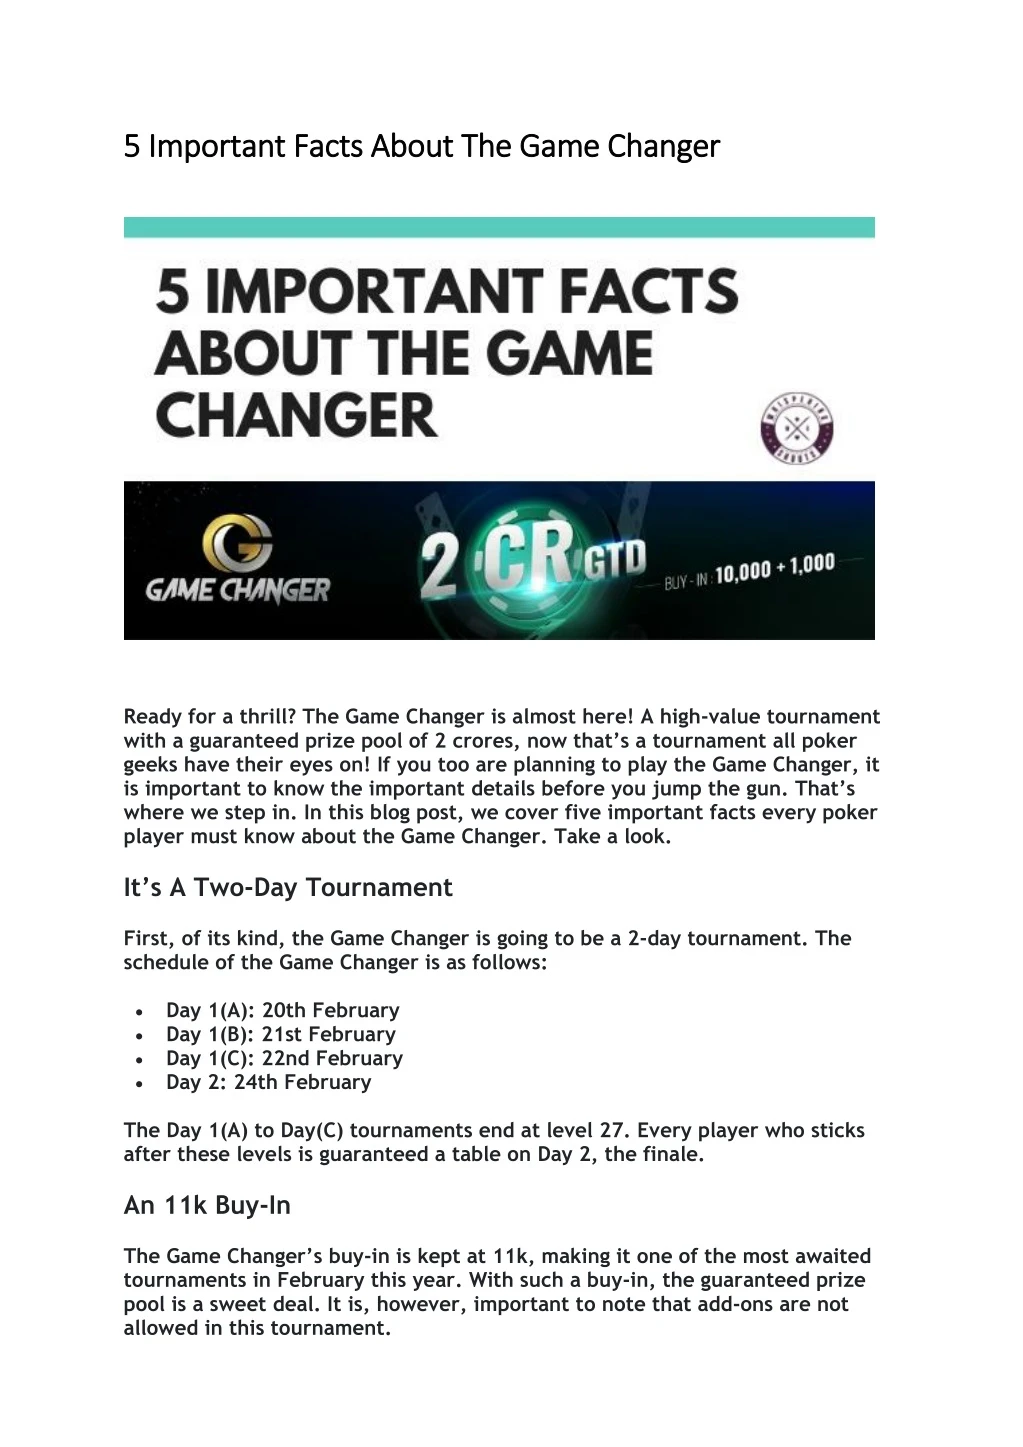 5 important facts about the game changer